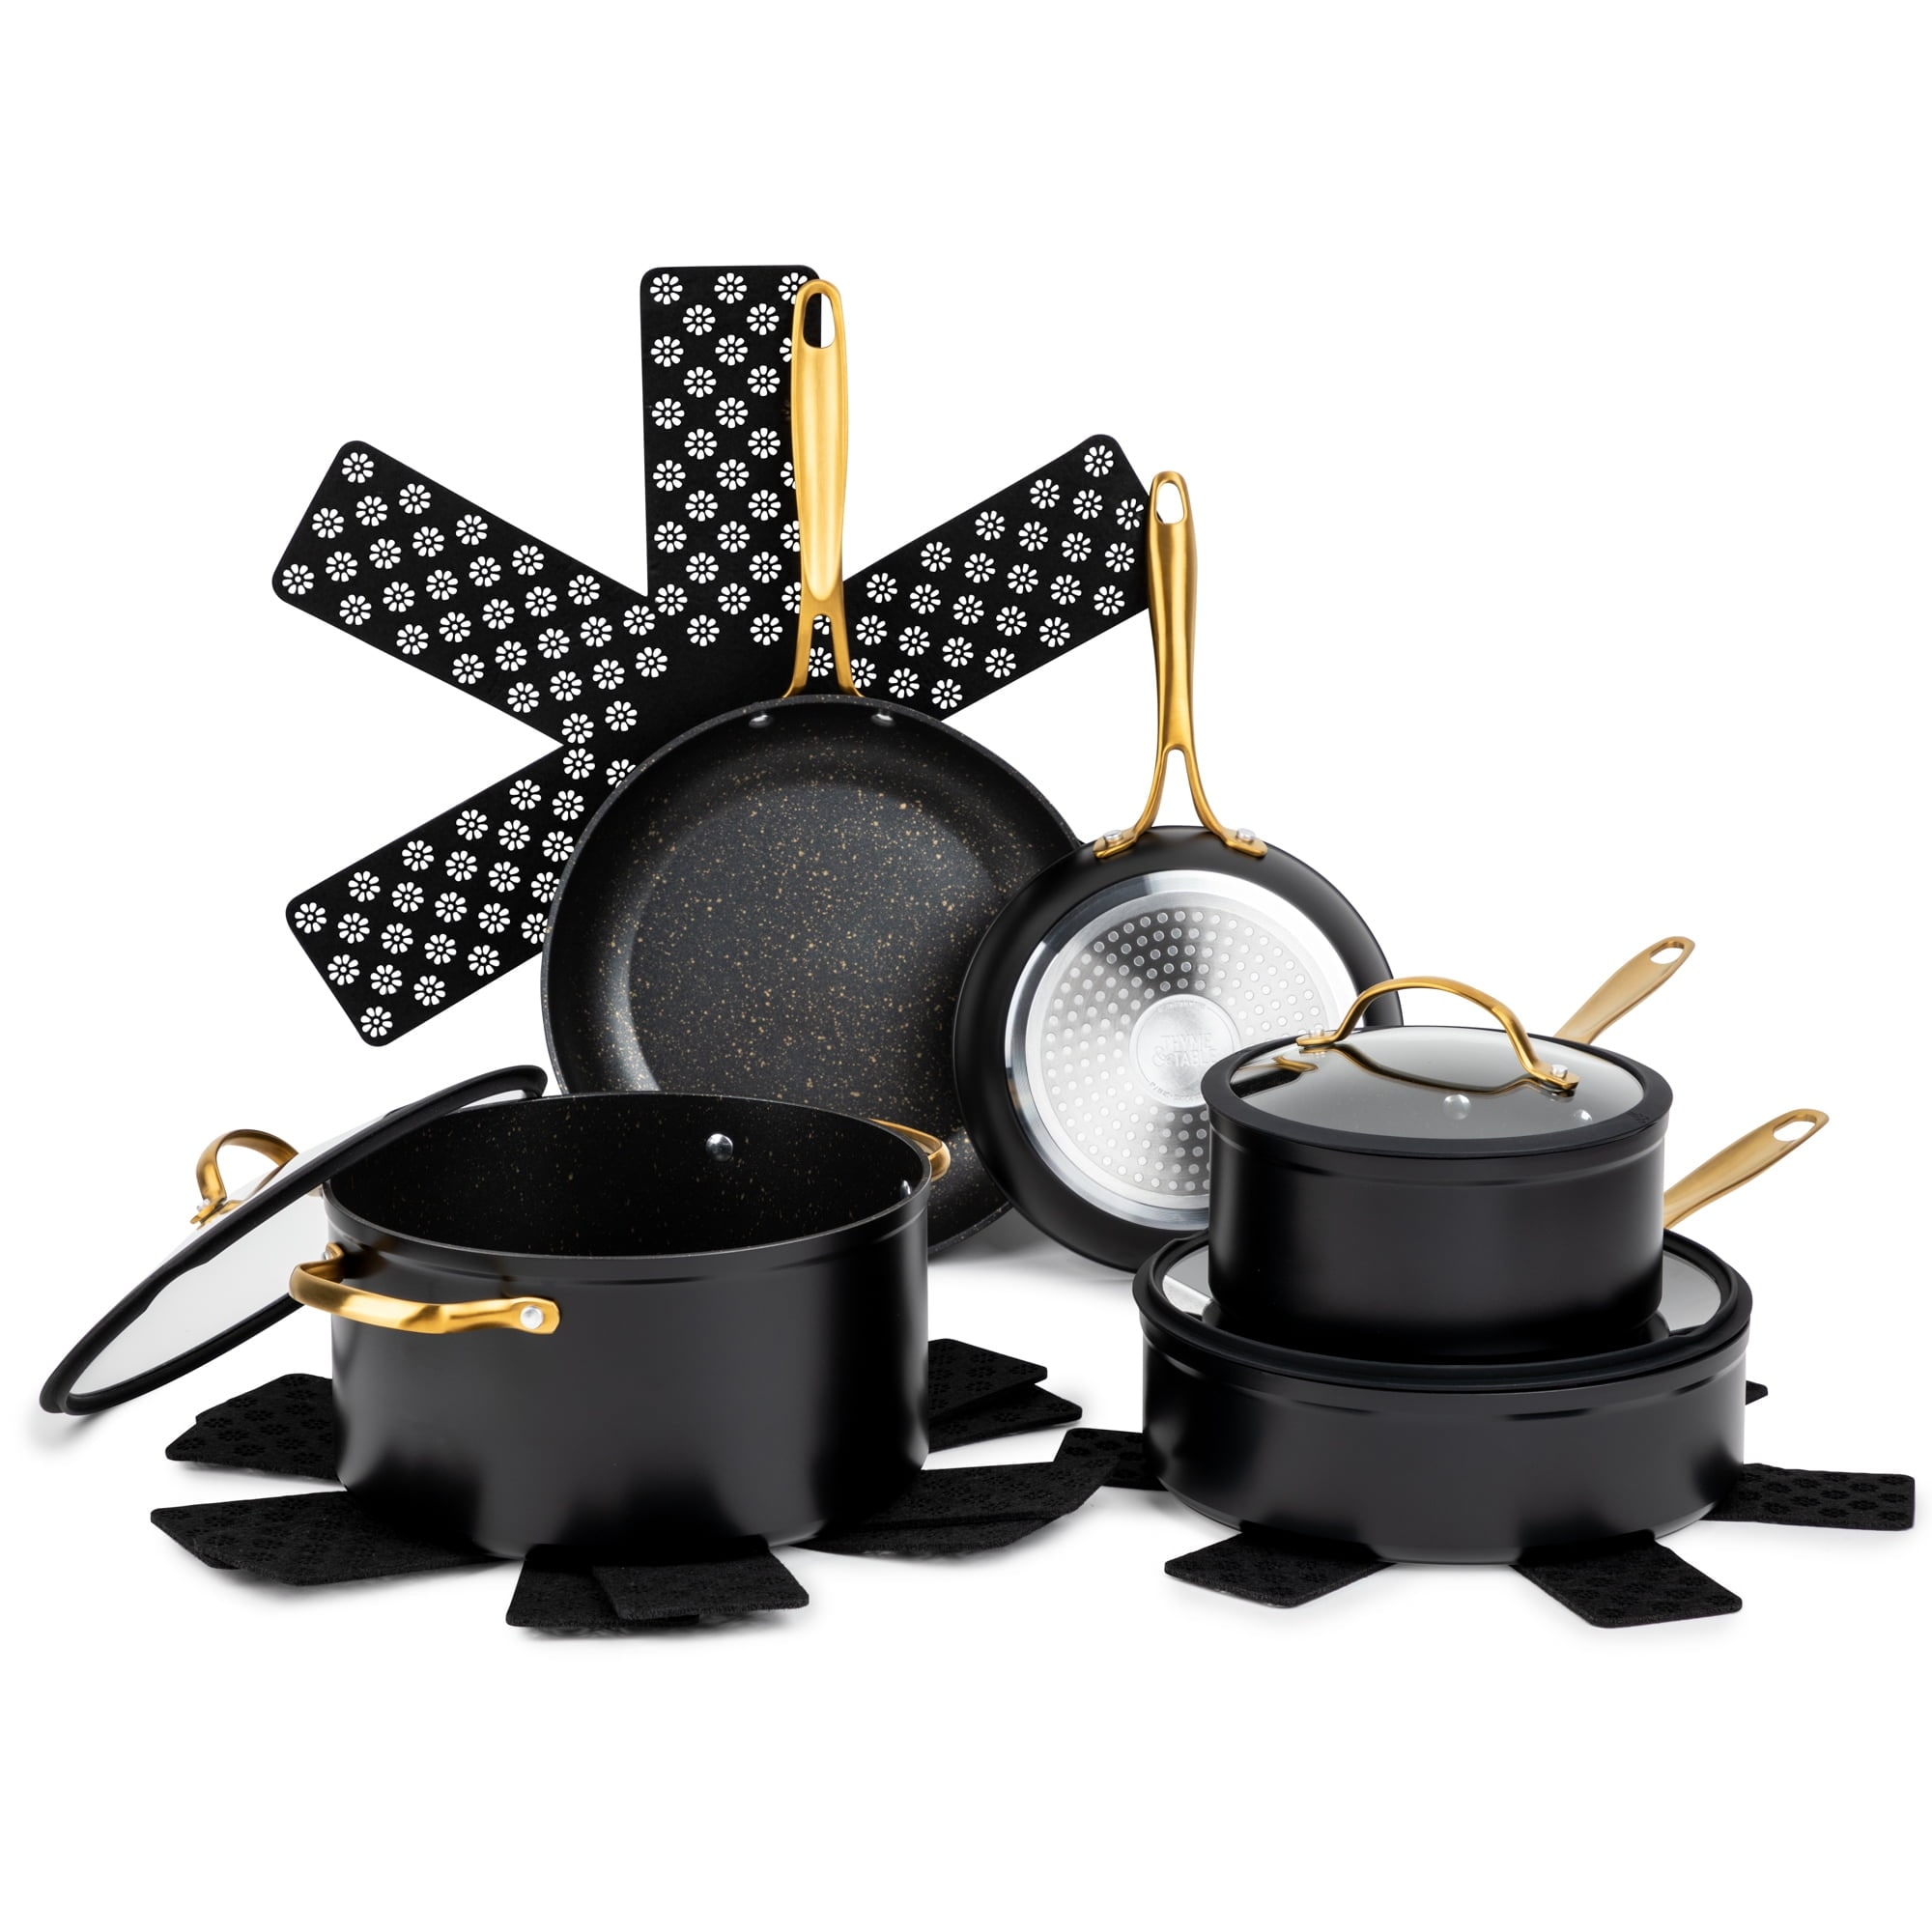 https://ak1.ostkcdn.com/images/products/is/images/direct/44a1ec5999df224b239f044d183e8a01fcef3a24/Non-Stick-Pots-and-Pans-12-Piece-Cookware-Set.jpg